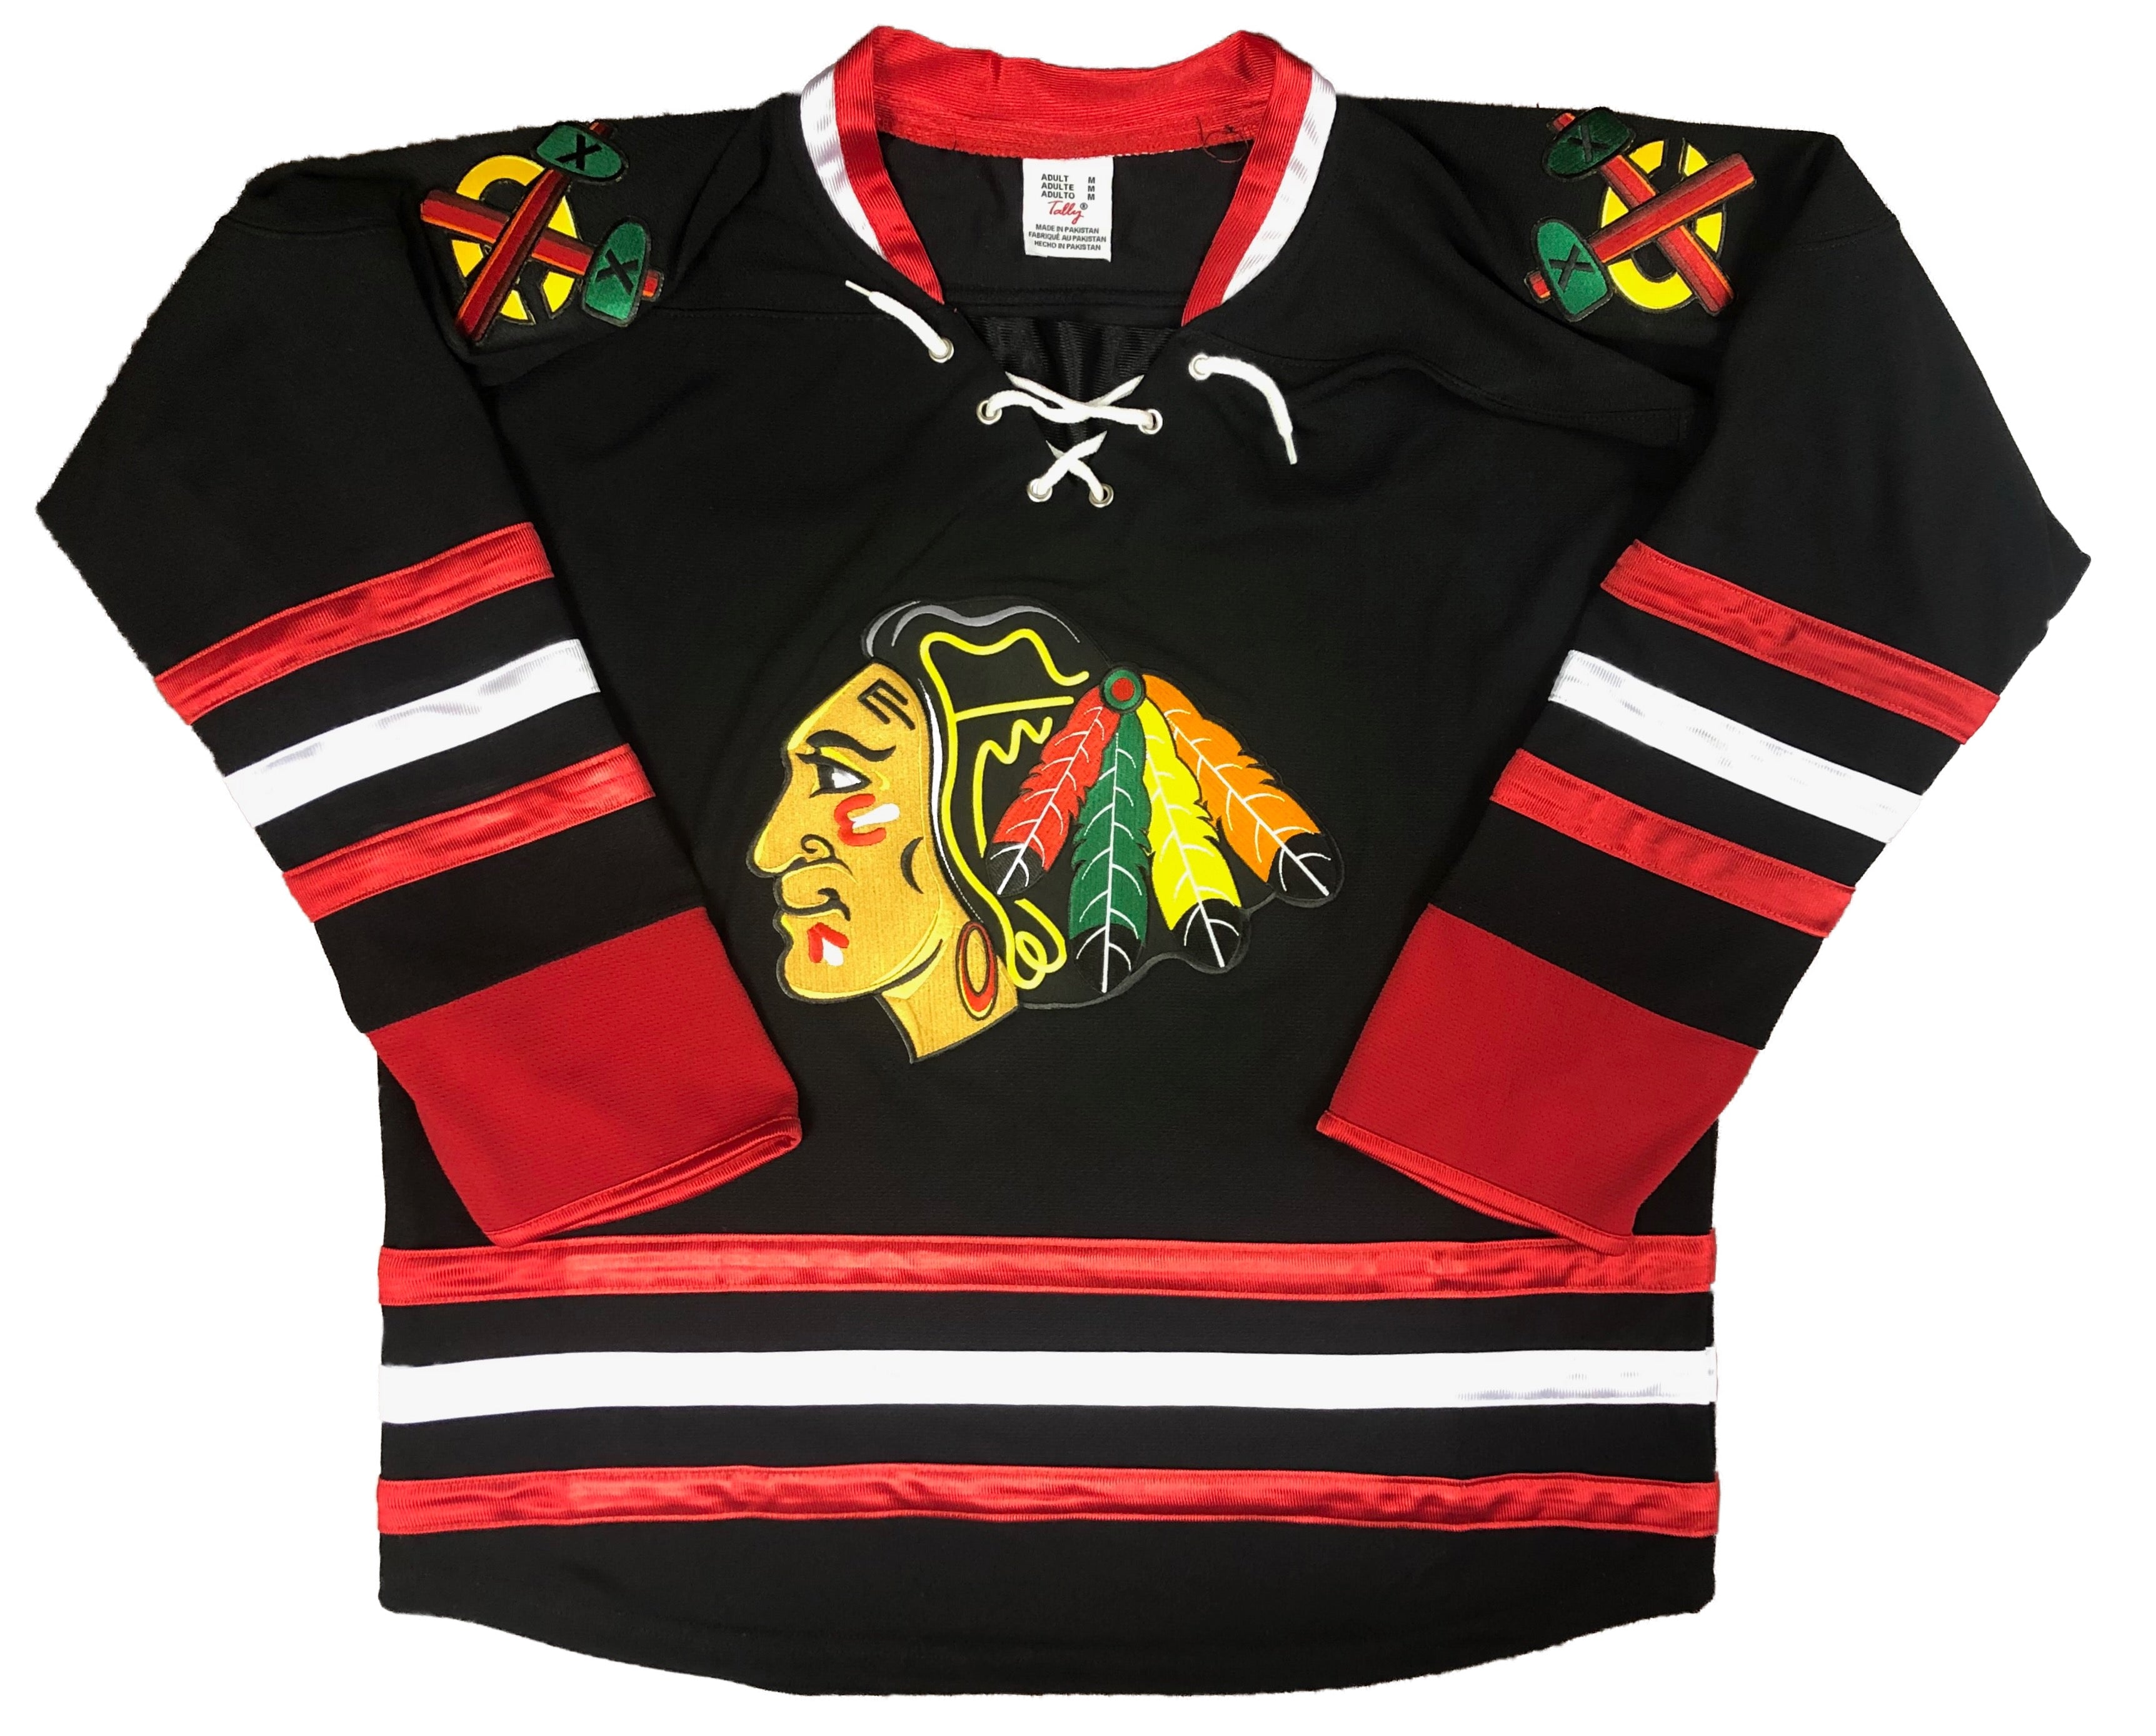 Custom Hockey Jerseys with A Blackhawk Logo and Shoulder Patches Adult Goalie Cut / (name and Number on Back and Sleeves) / White